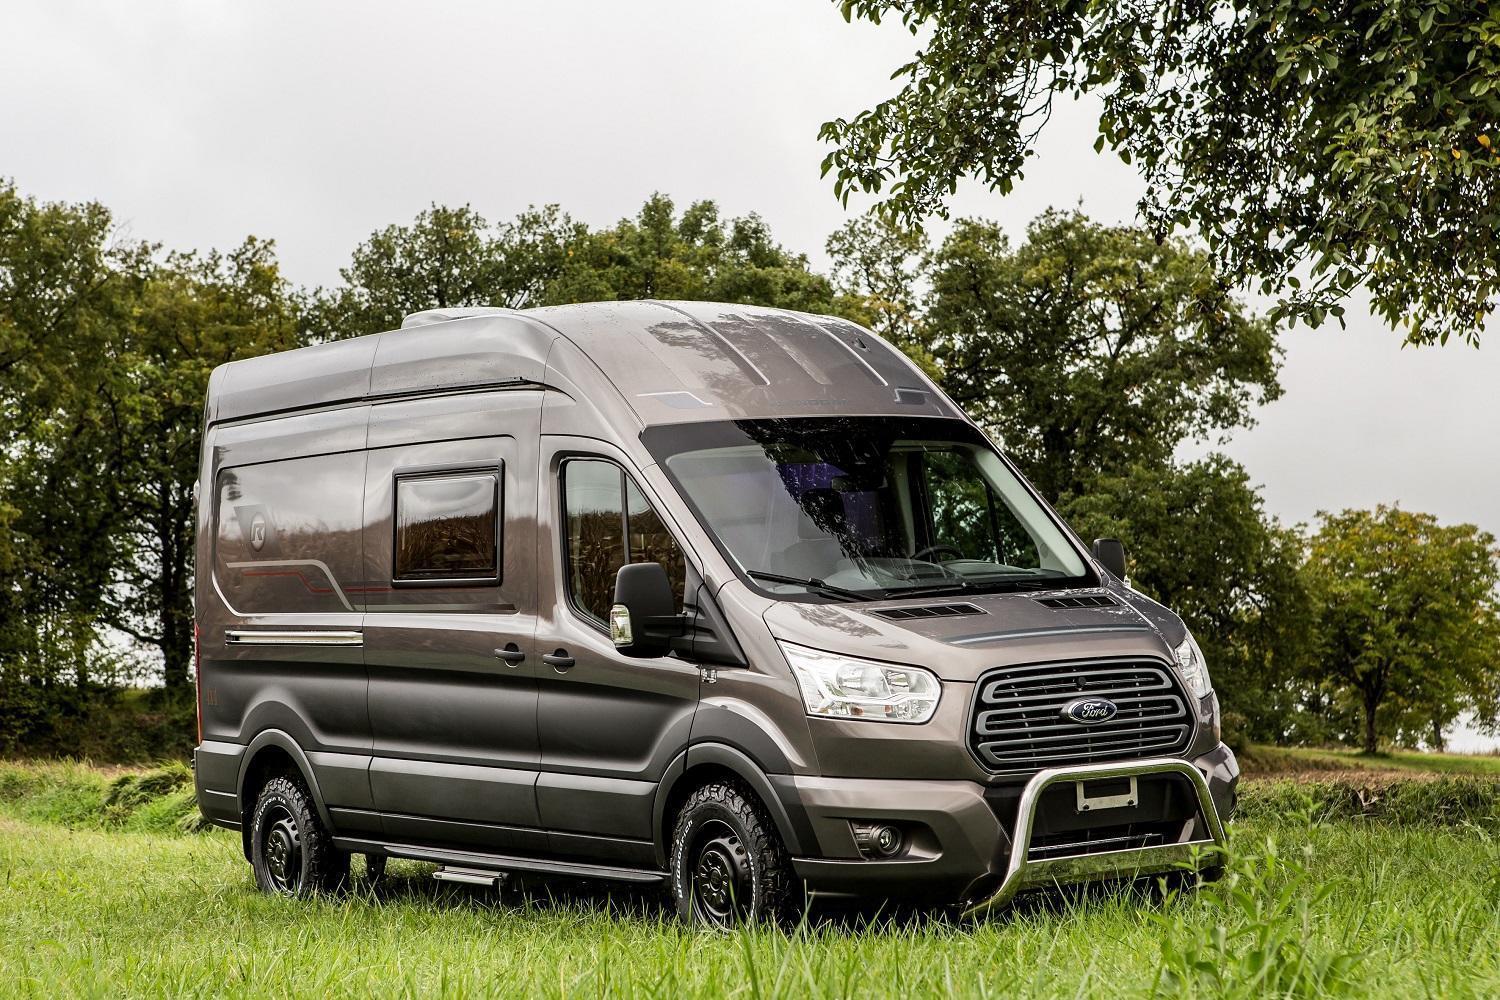 Ford and Trigano Deliver Transit Motorhomes with Intelligent AWD